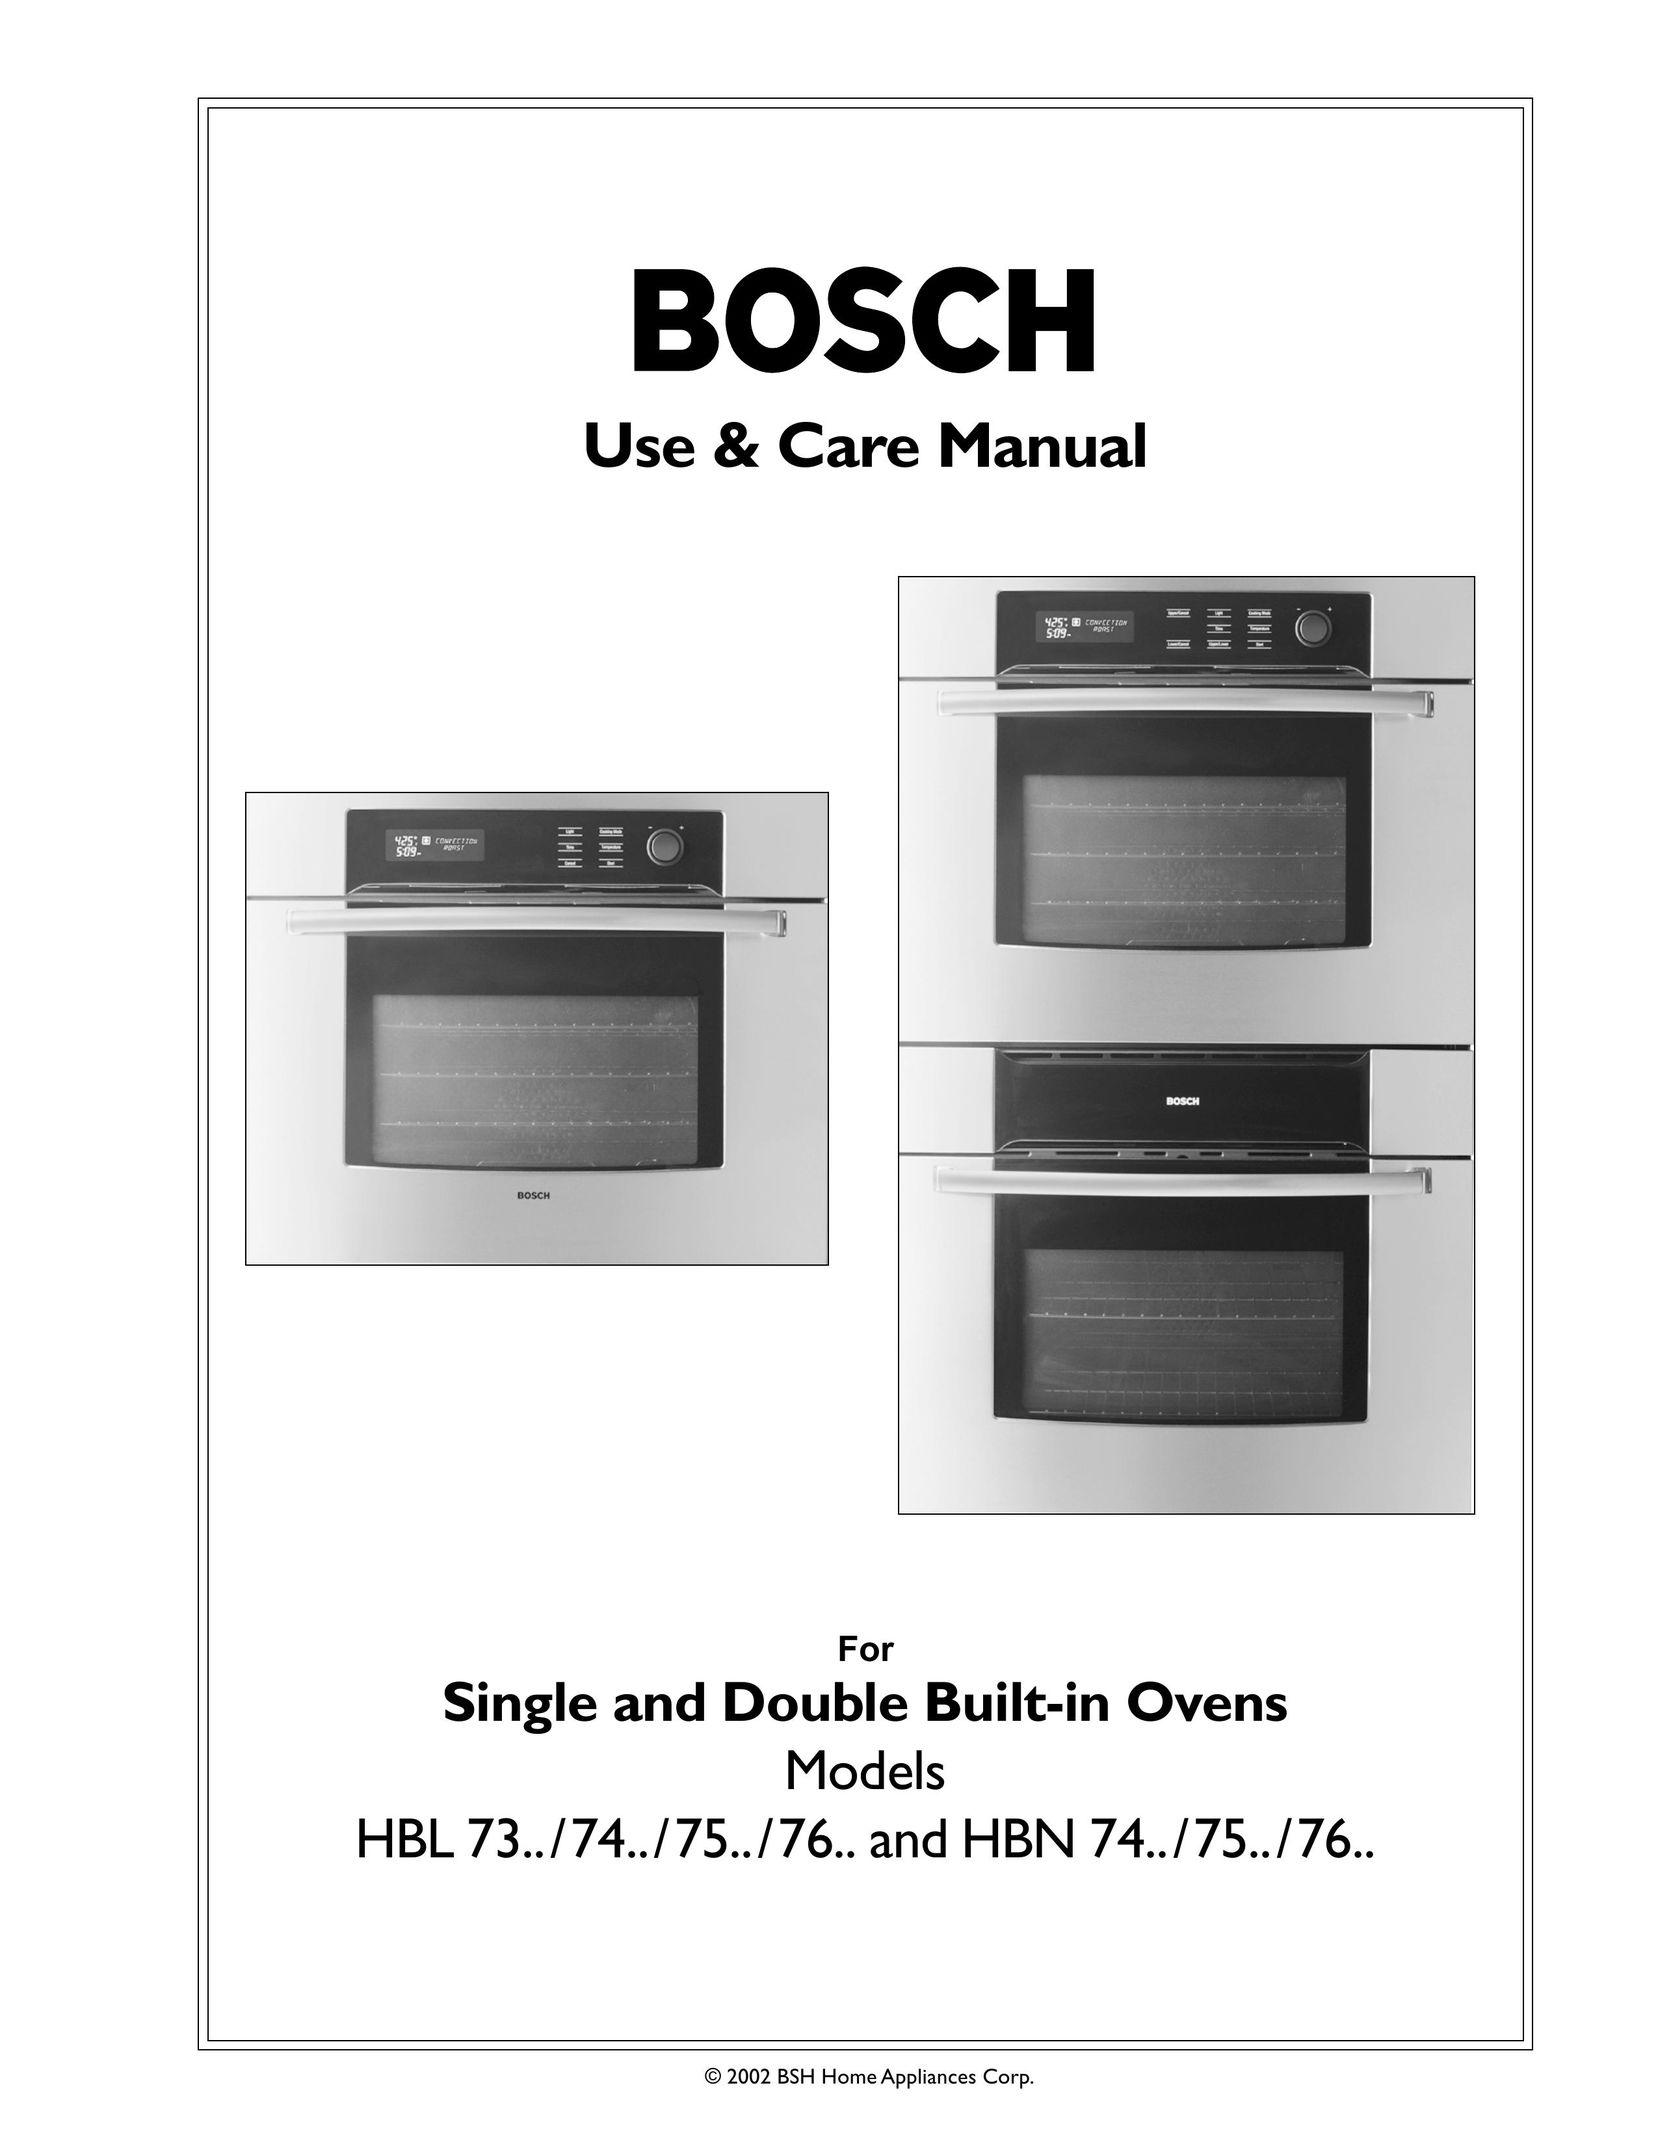 Bosch Appliances HBL 76 Oven User Manual (Page 1)